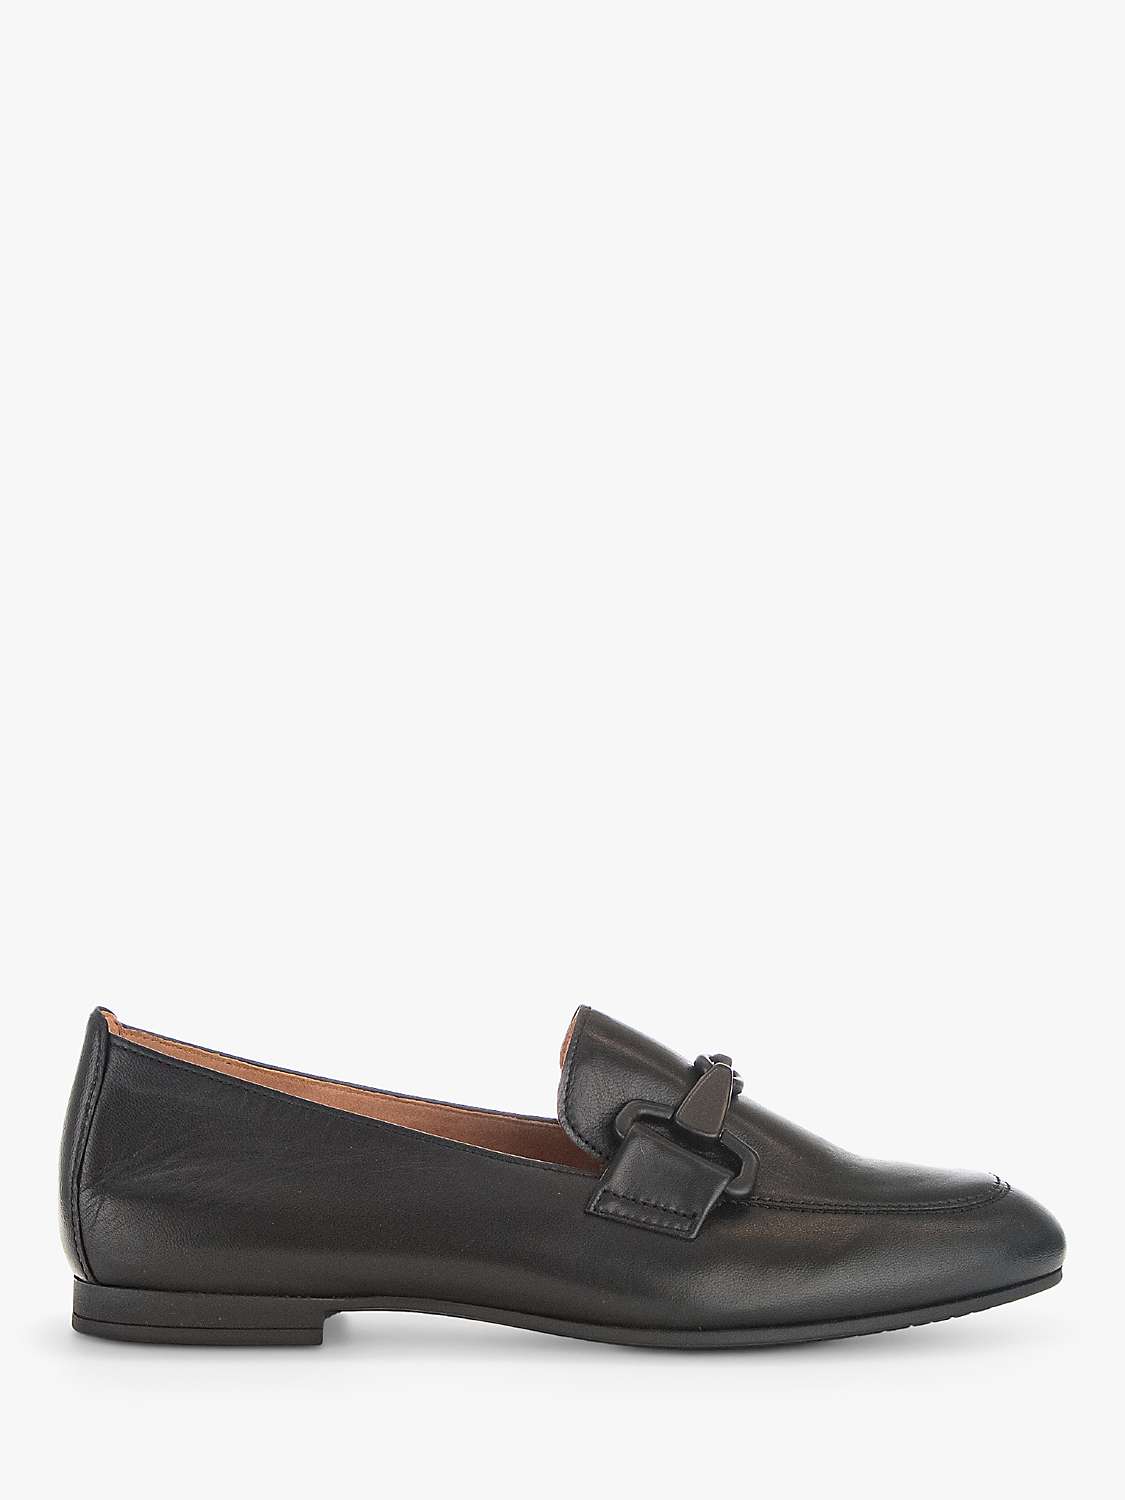 Buy Gabor Jangle Leather Loafers Online at johnlewis.com